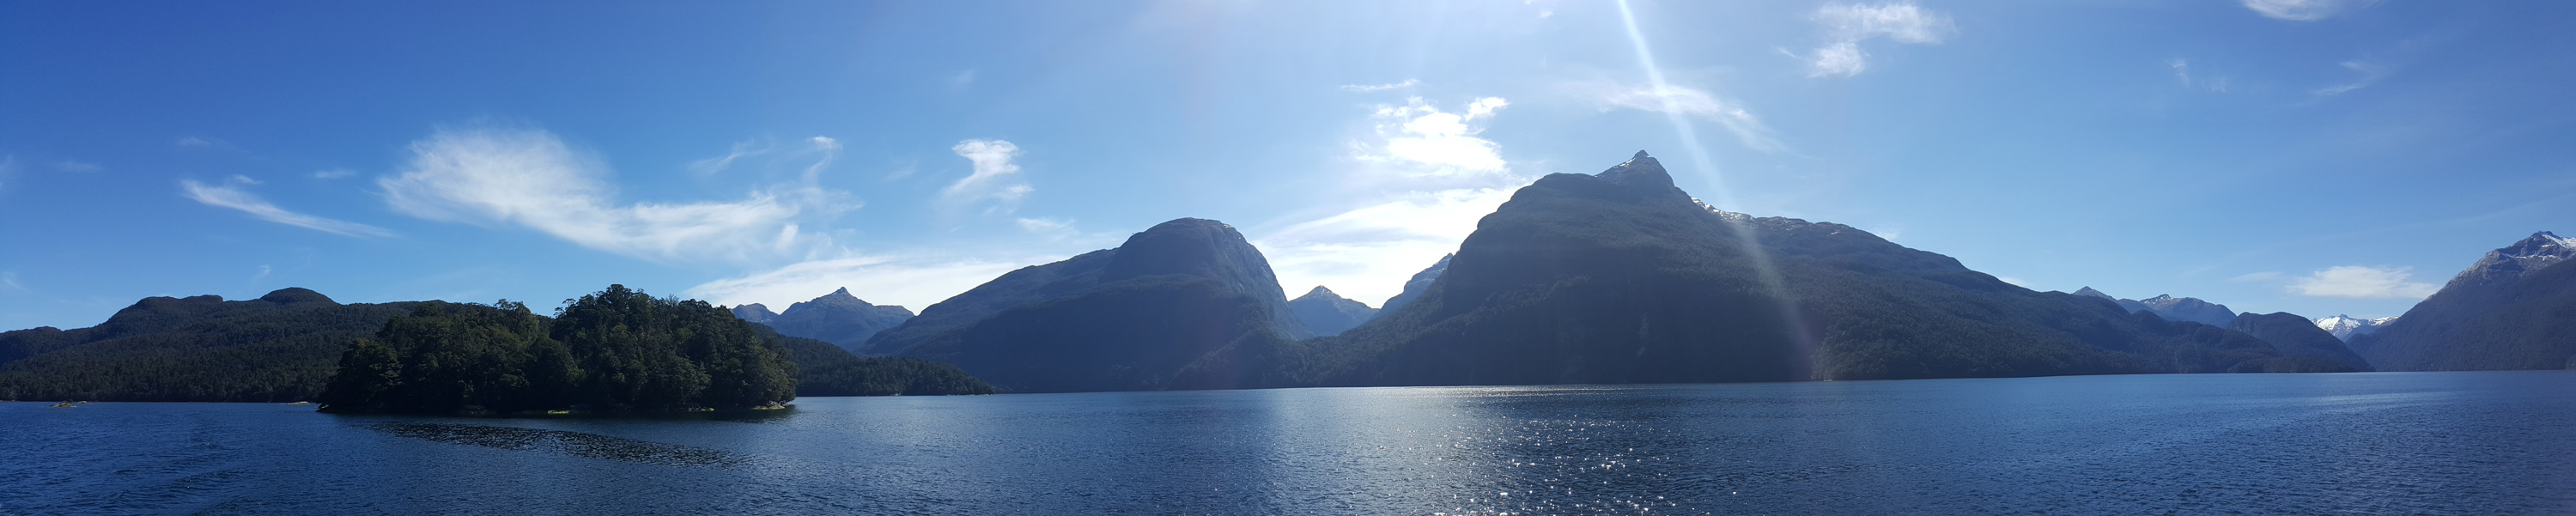 Panoramic view of Cooper Island, Dusky Sound, Fiordland National Park